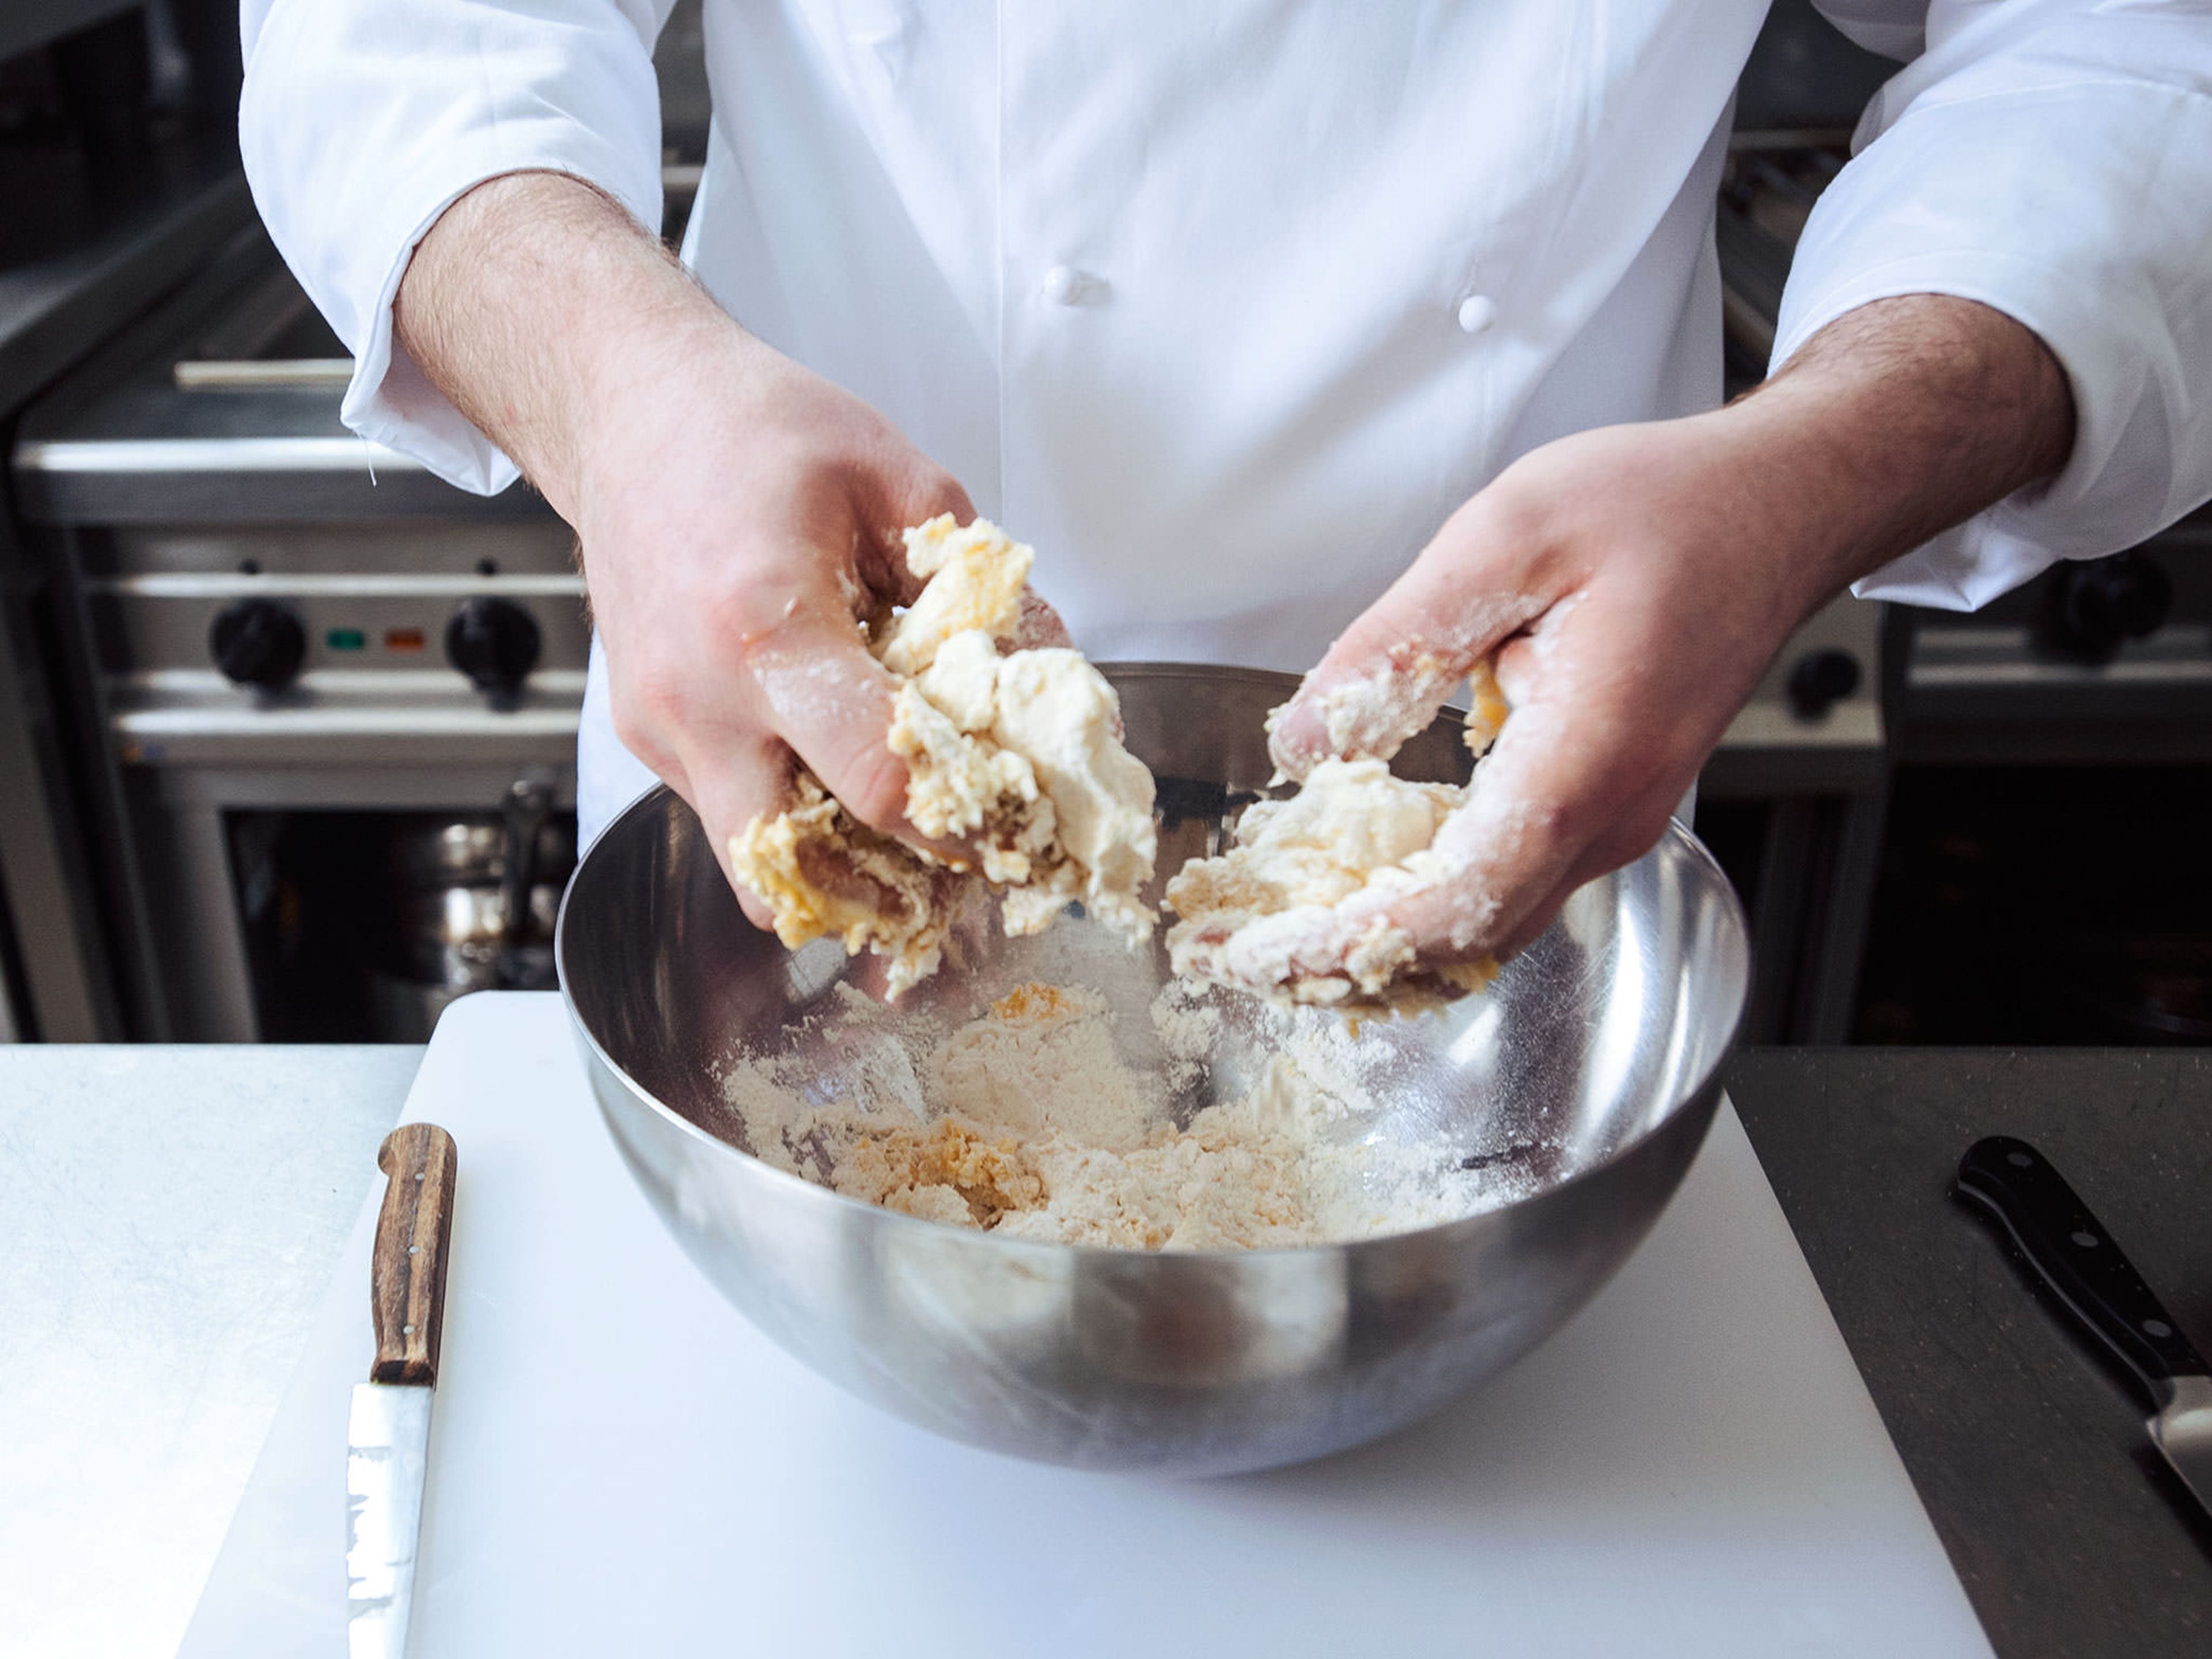 Mix flour and sugar in a mixing bowl until combined. Add egg and butter, and mix with your hands until a crumbly dough forms. Form into a disc, wrap tightly in plastic, and transfer to the refrigerator to chill for approx. 30 – 60 min.